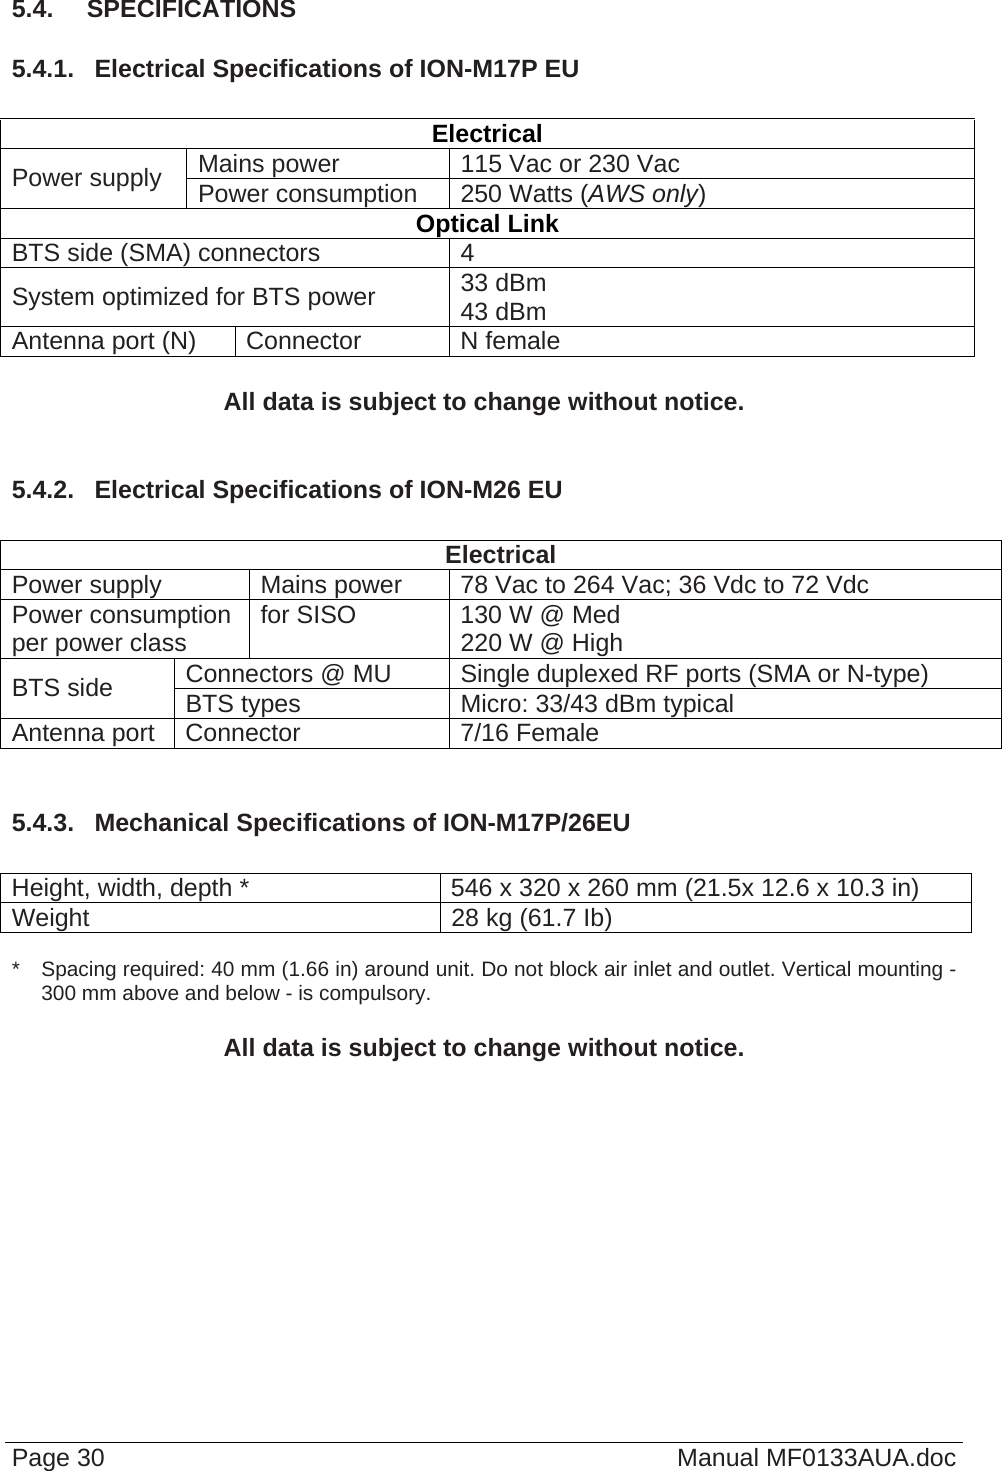  Page 30  Manual MF0133AUA.doc 5.4.  SPECIFICATIONS 5.4.1.  Electrical Specifications of ION-M17P EU  Electrical Mains power  115 Vac or 230 Vac Power supply  Power consumption  250 Watts (AWS only) Optical Link BTS side (SMA) connectors 4 System optimized for BTS power  33 dBm 43 dBm Antenna port (N)  Connector  N female  All data is subject to change without notice.  5.4.2.  Electrical Specifications of ION-M26 EU  Electrical Power supply  Mains power  78 Vac to 264 Vac; 36 Vdc to 72 Vdc Power consumption per power class  for SISO  130 W @ Med 220 W @ High Connectors @ MU  Single duplexed RF ports (SMA or N-type) BTS side  BTS types  Micro: 33/43 dBm typical Antenna port  Connector  7/16 Female  5.4.3.  Mechanical Specifications of ION-M17P/26EU  Height, width, depth *  546 x 320 x 260 mm (21.5x 12.6 x 10.3 in). Weight  28 kg (61.7 Ib)  *  Spacing required: 40 mm (1.66 in) around unit. Do not block air inlet and outlet. Vertical mounting - 300 mm above and below - is compulsory.  All data is subject to change without notice. 